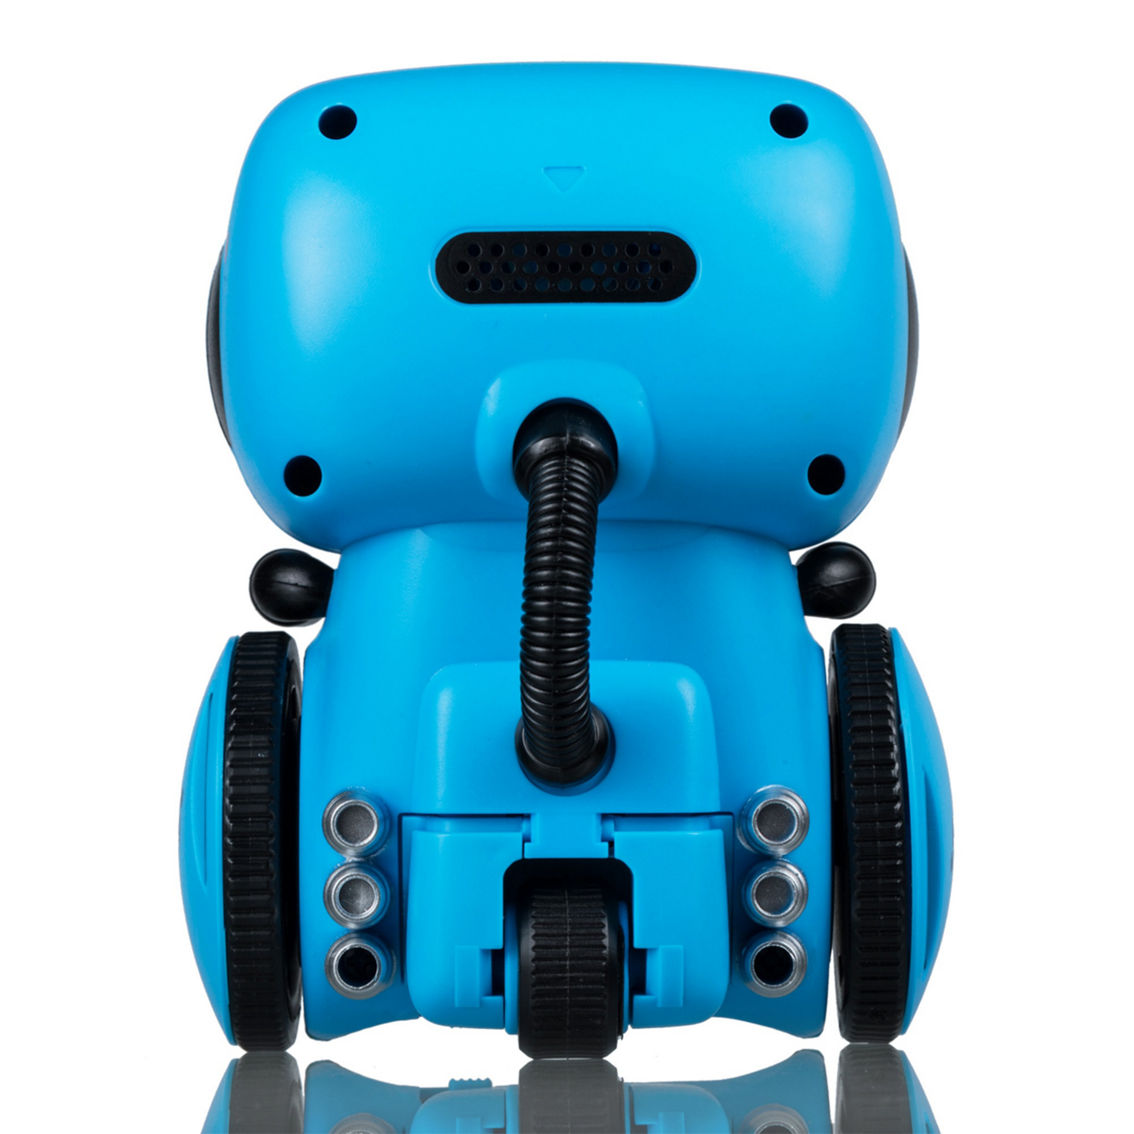 Contixo R1 Learning Educational Kids Robot, Blue - Image 2 of 4